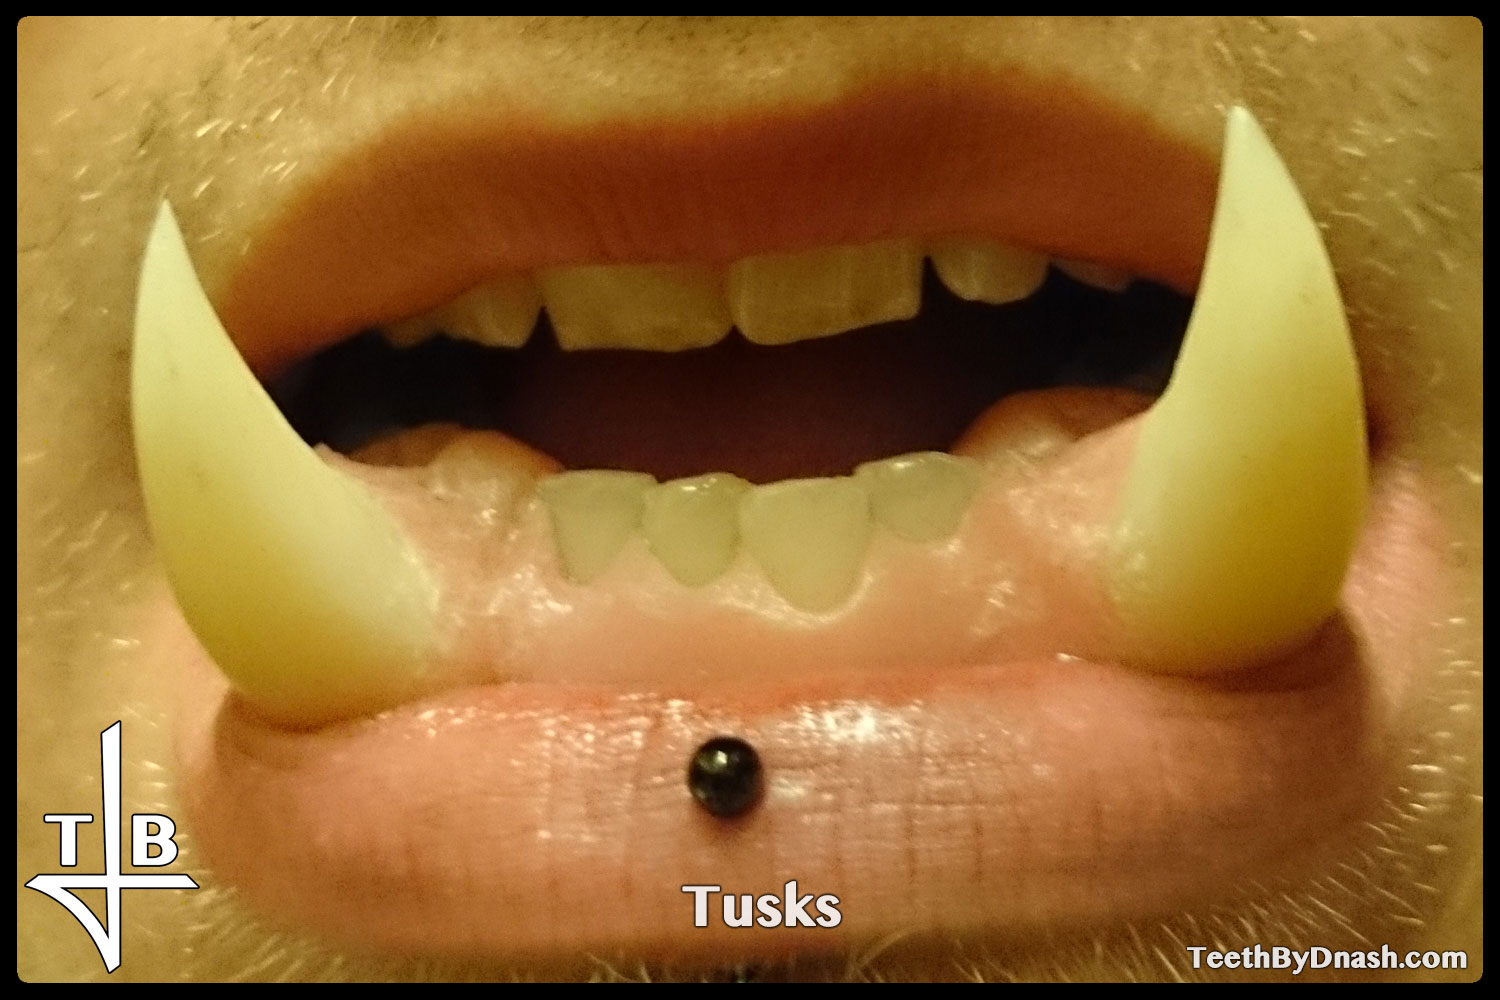 http://tusks-other_tooth_fx-teeth_by_dnash-01